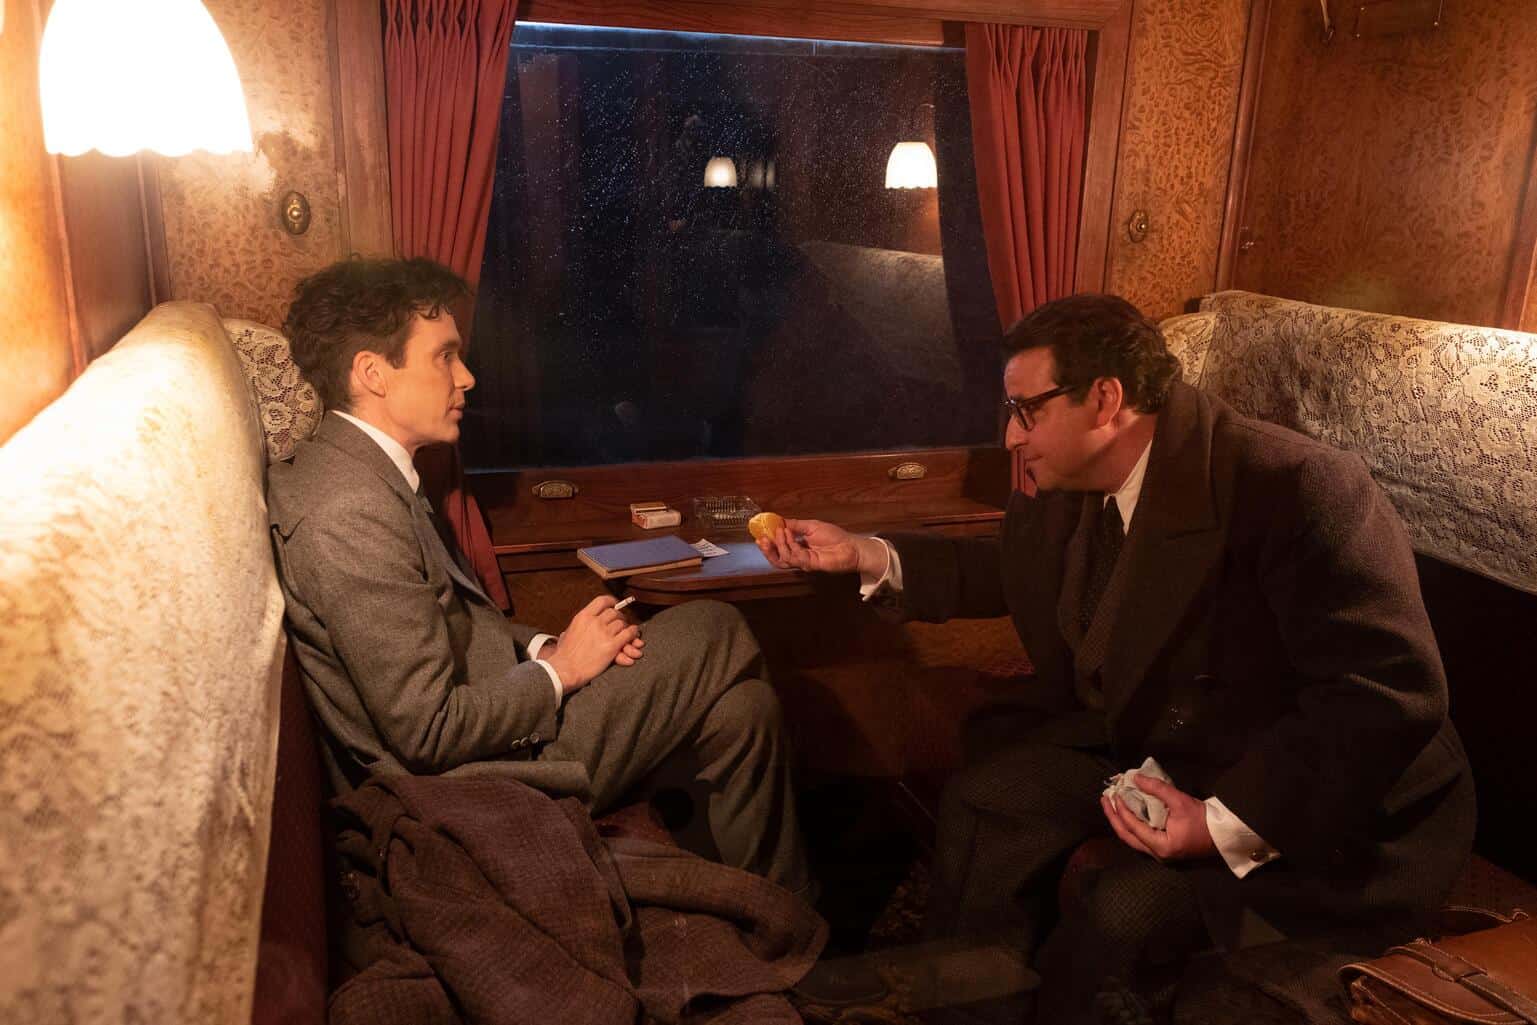 A man offers another man food on a train in this image from Universal Pictures.